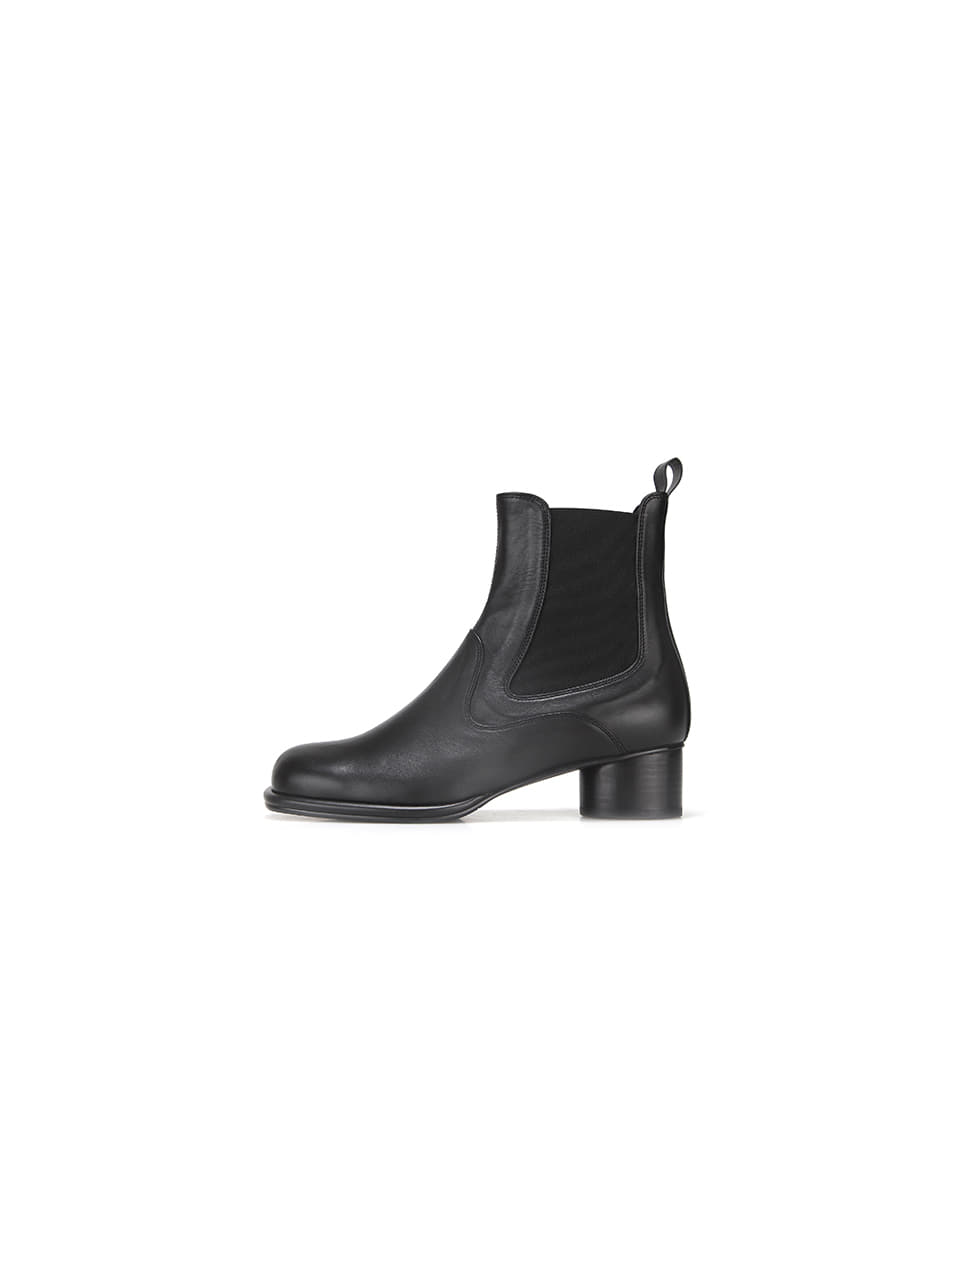 Jd Ankle Boots_21533_black